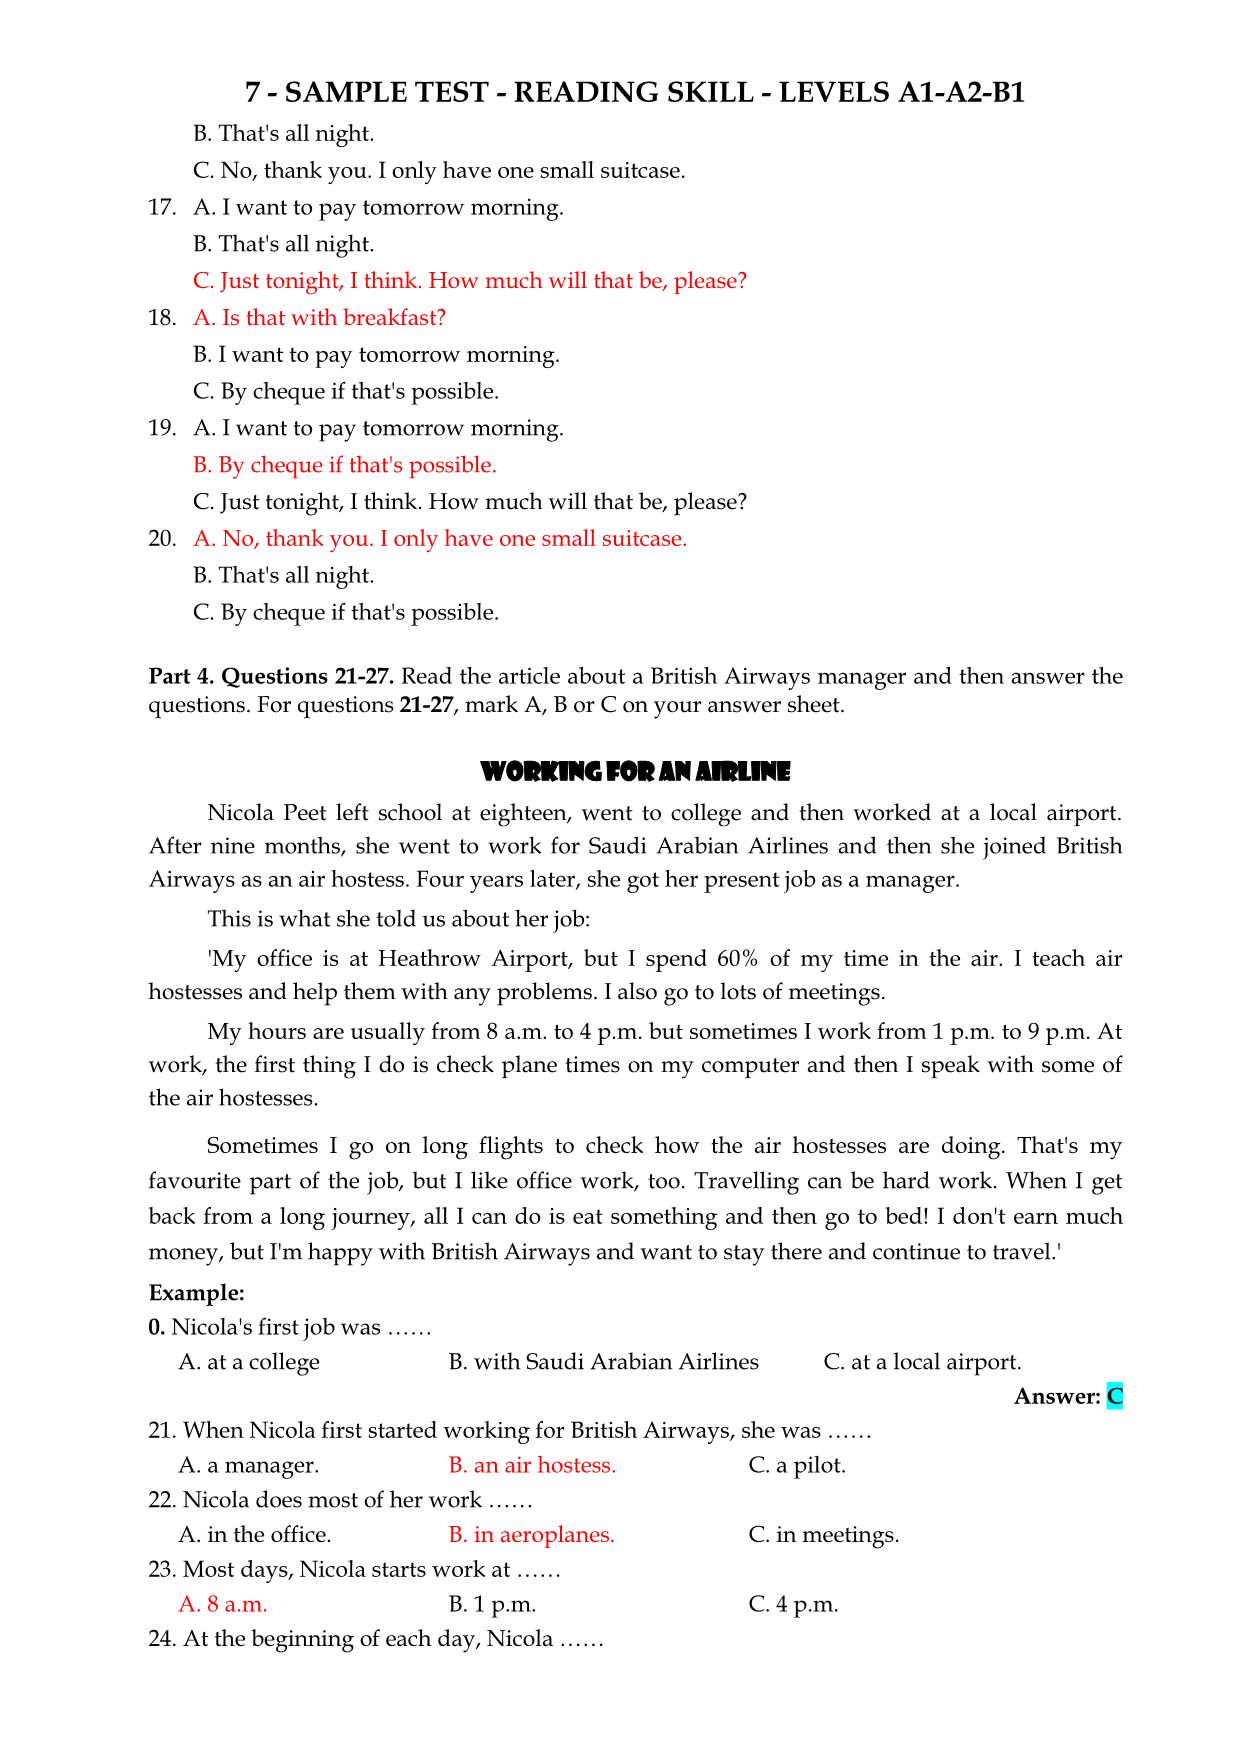 Tiếng Anh - Sample test - Reading skill - Levels  A1 - A2 - B1 trang 3